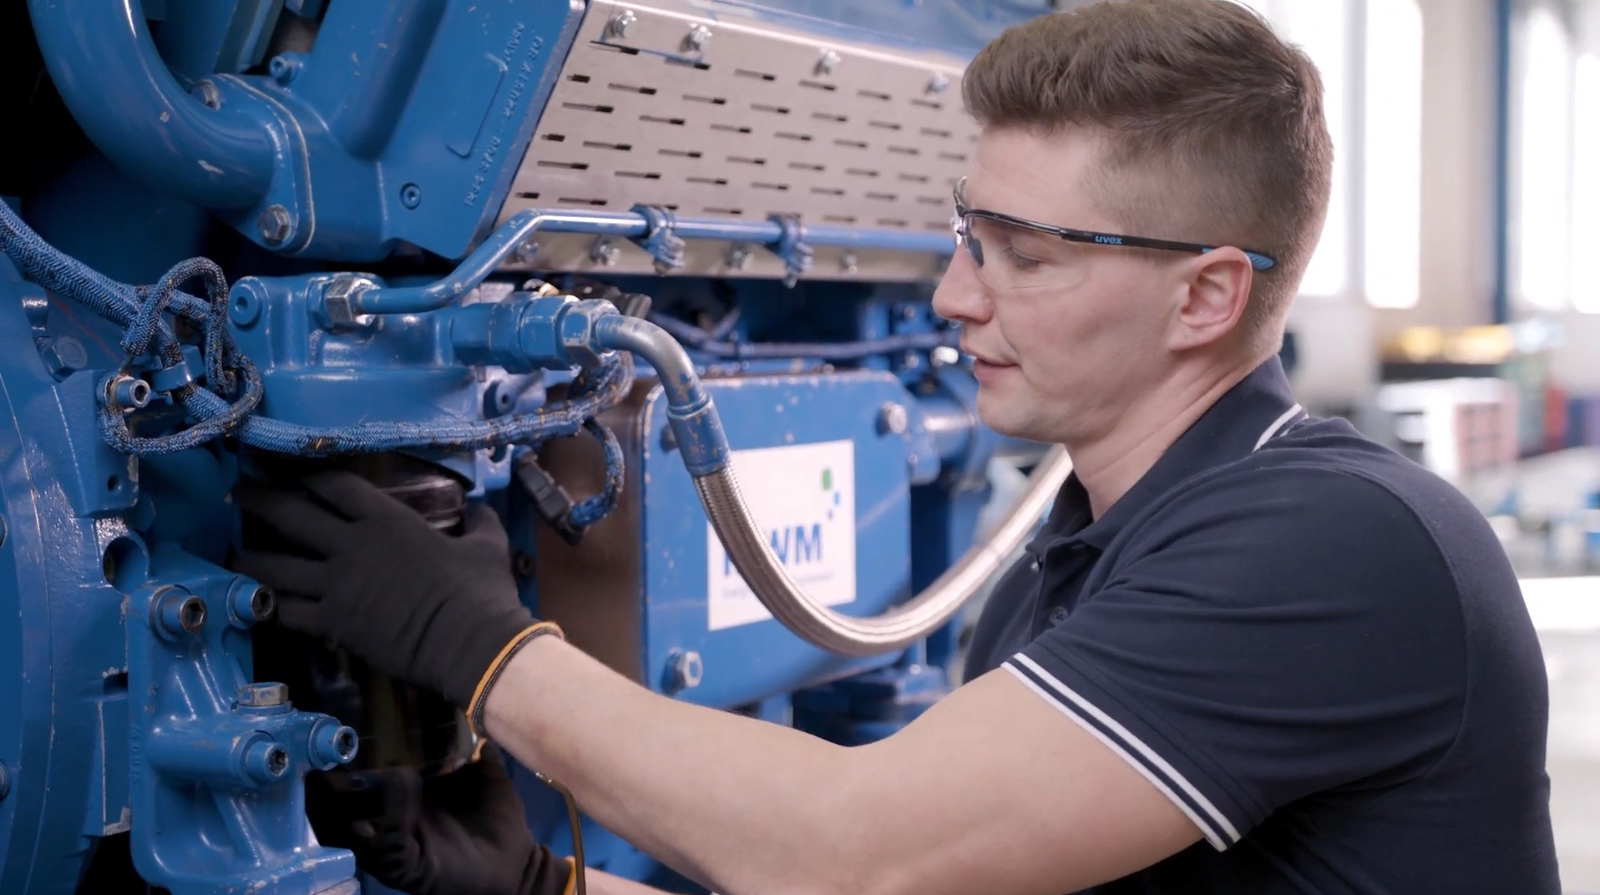 Alexander Klotz, Technical Trainer at the Learning Center Service in Mannheim, explains the replacement of the lube oil filter in the MWM gas engine. 